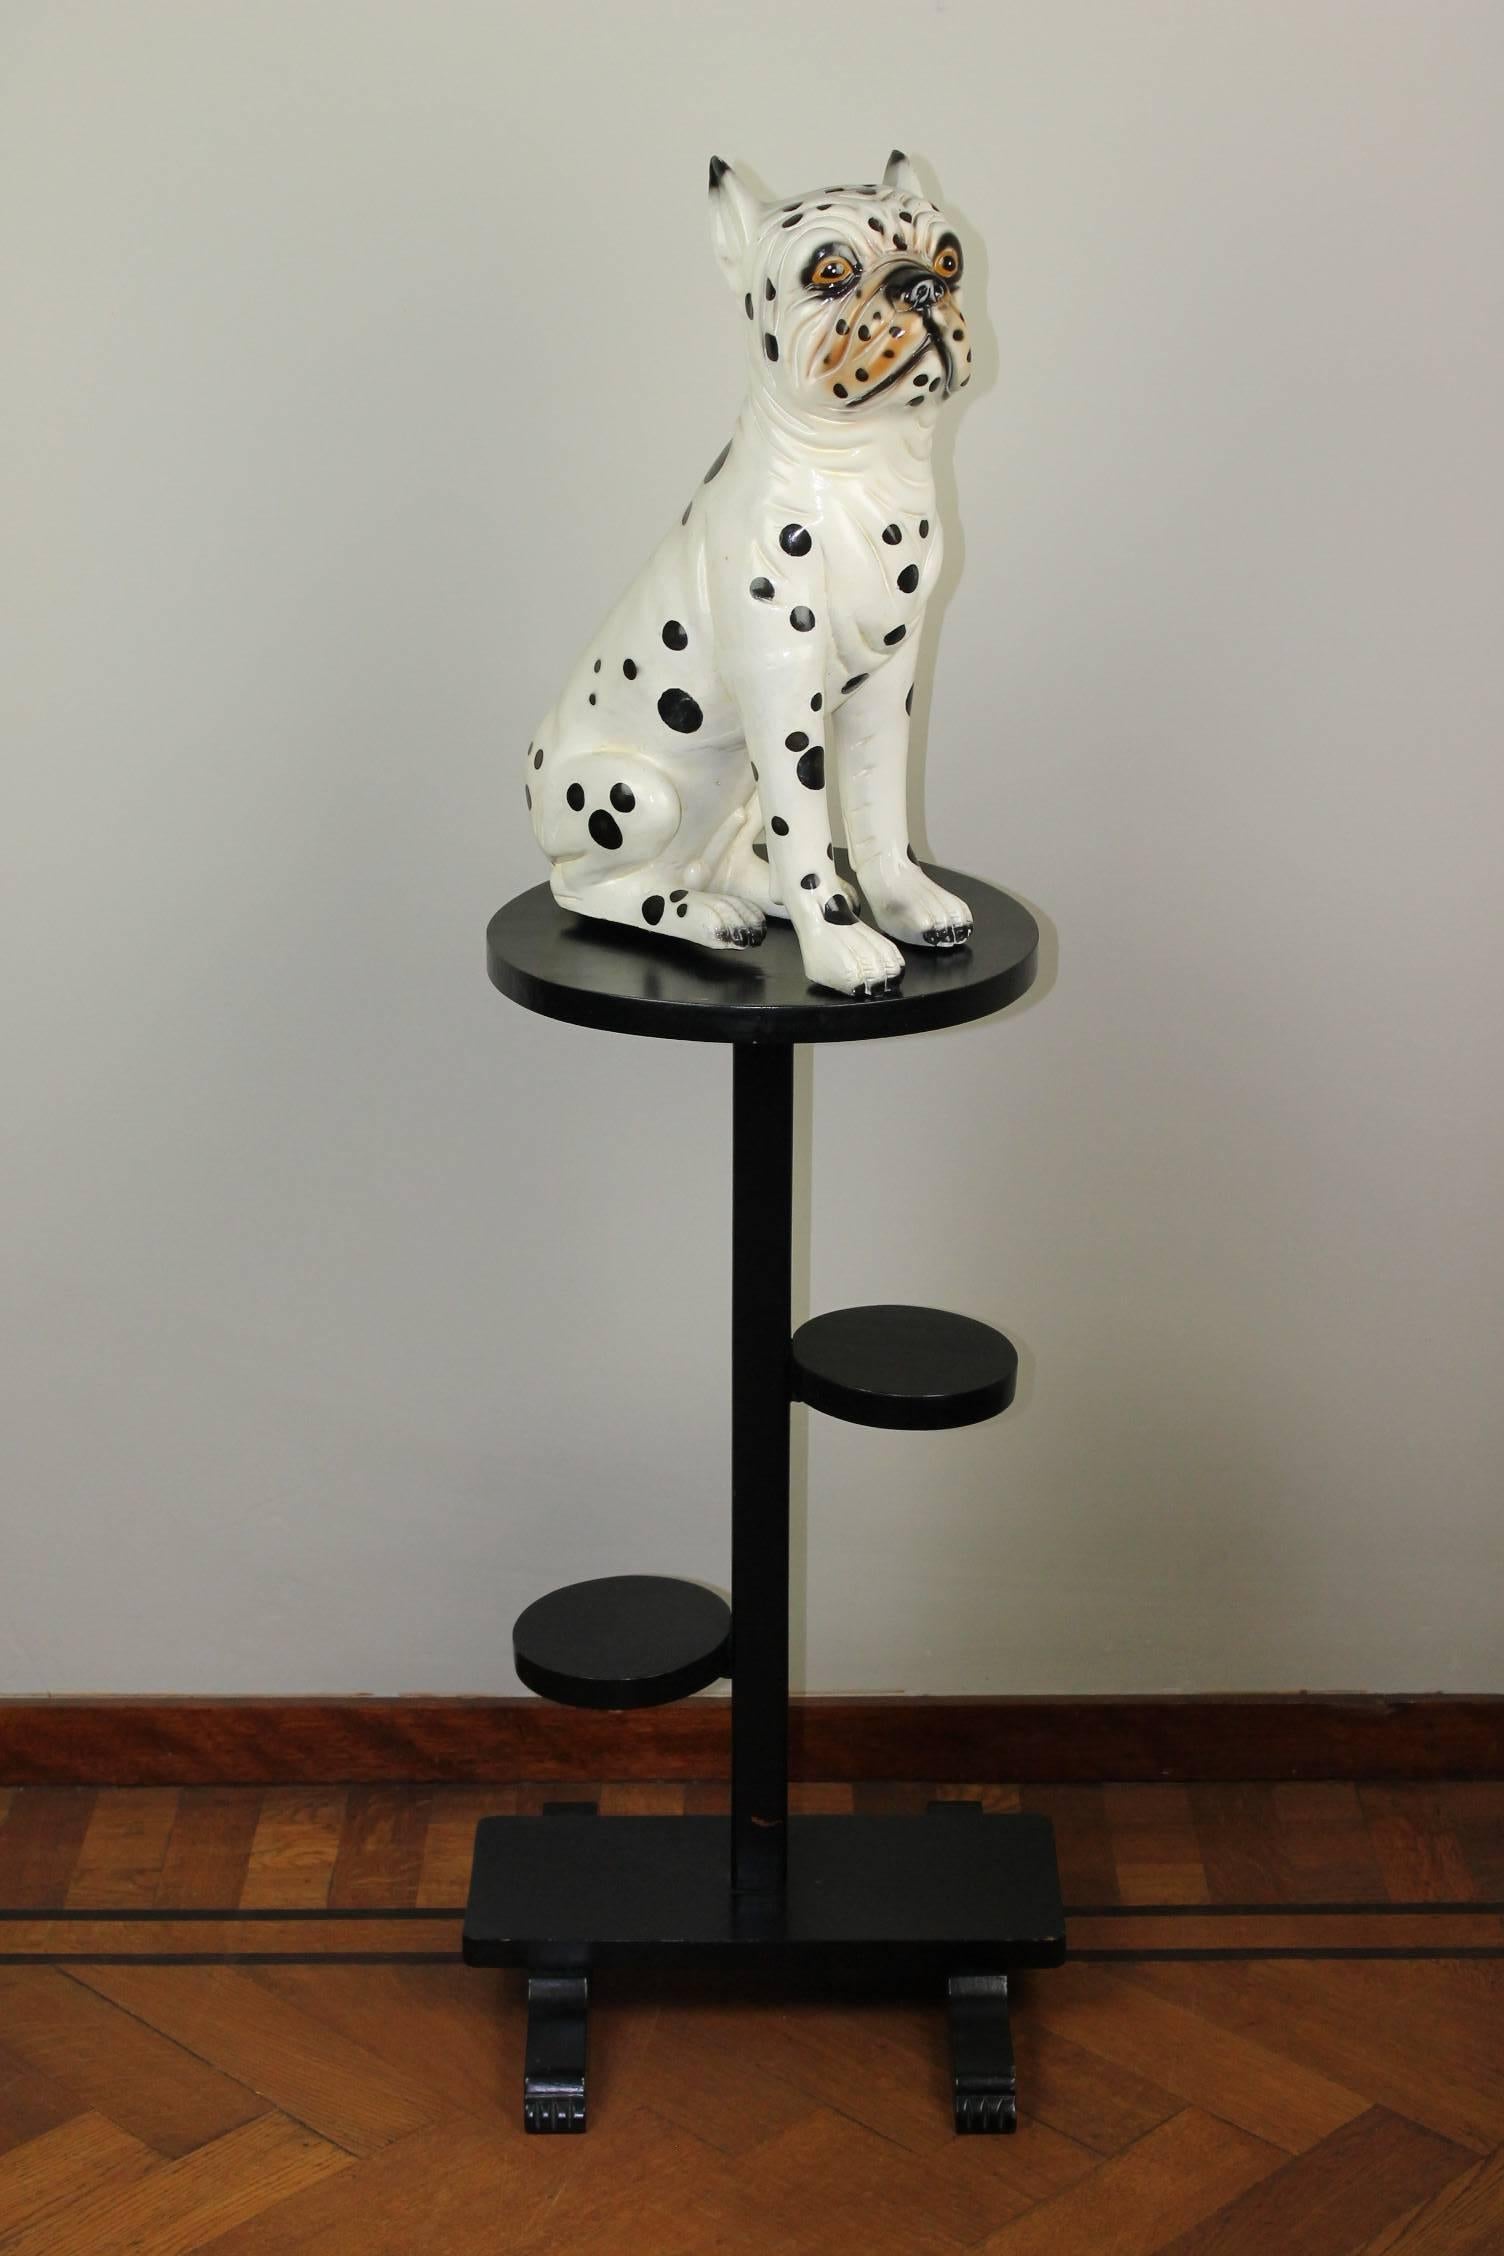 Hand-painted ceramic dog sculpture from the 1960s.
This vintage ceramic Puppy Dog - Dane Dog Puppy  - little Dalmatian Dog - Dalmatian Bulldog 
sculpture is so adorable. This Dog Figurine has a white Fur with black spots.
It's a bulldog born in a